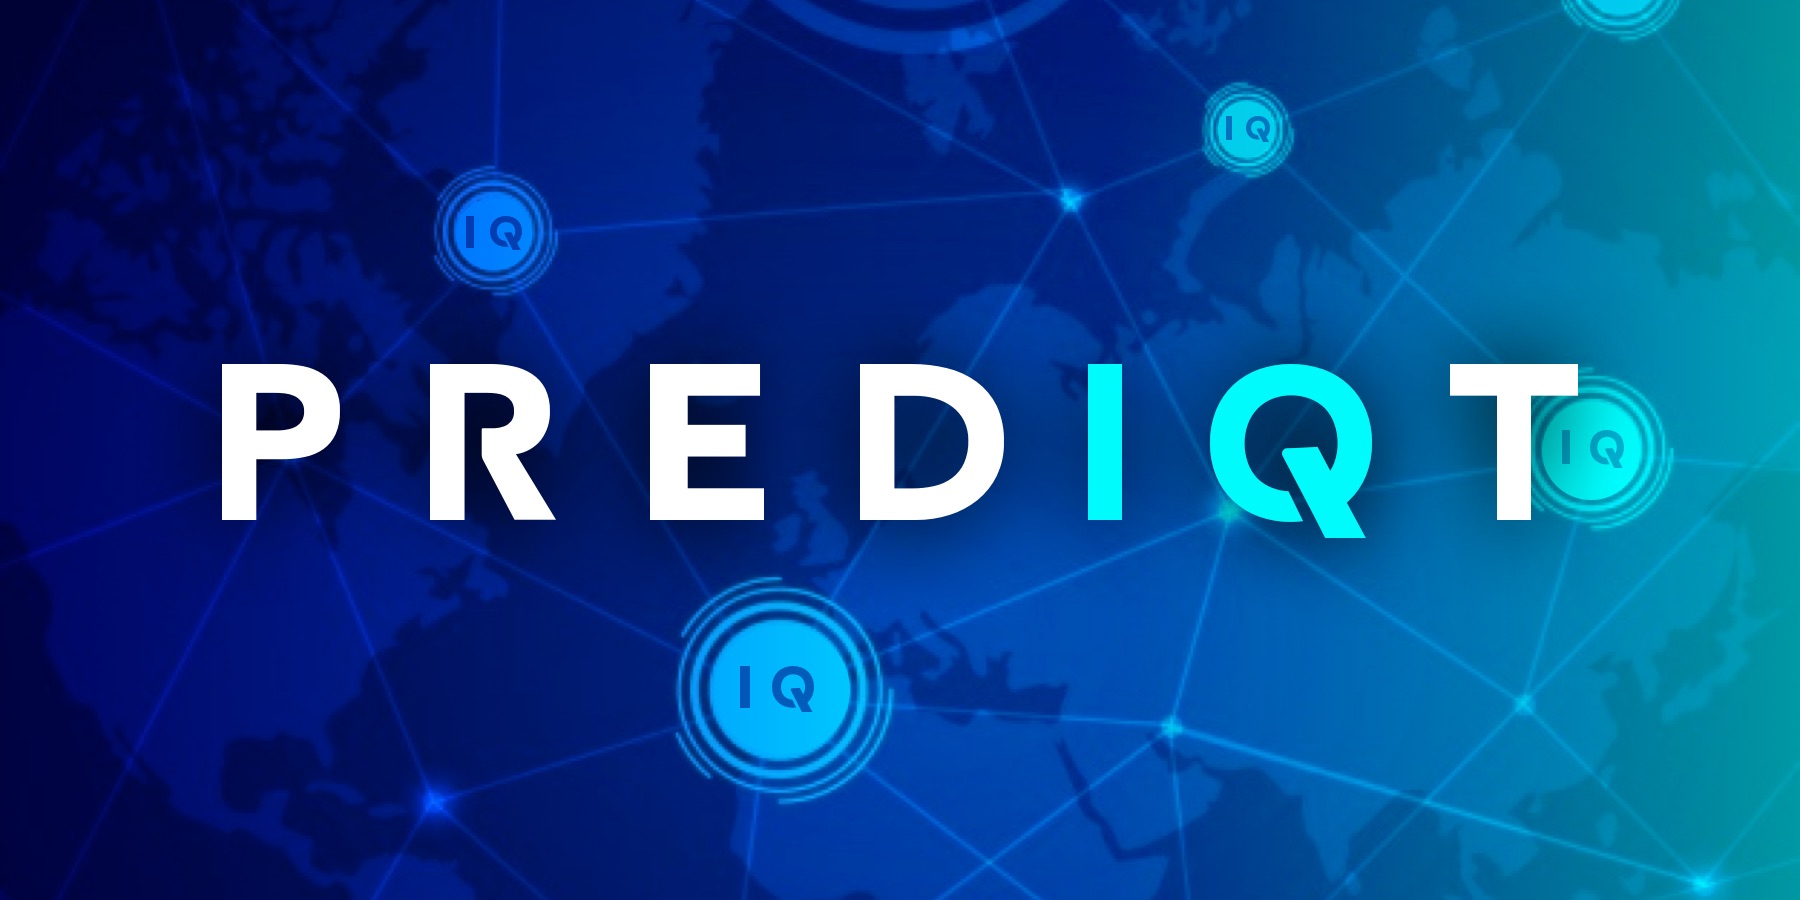 PredIQt 2.0 Now Offers Easy-to-Use Prediction Markets on EOS